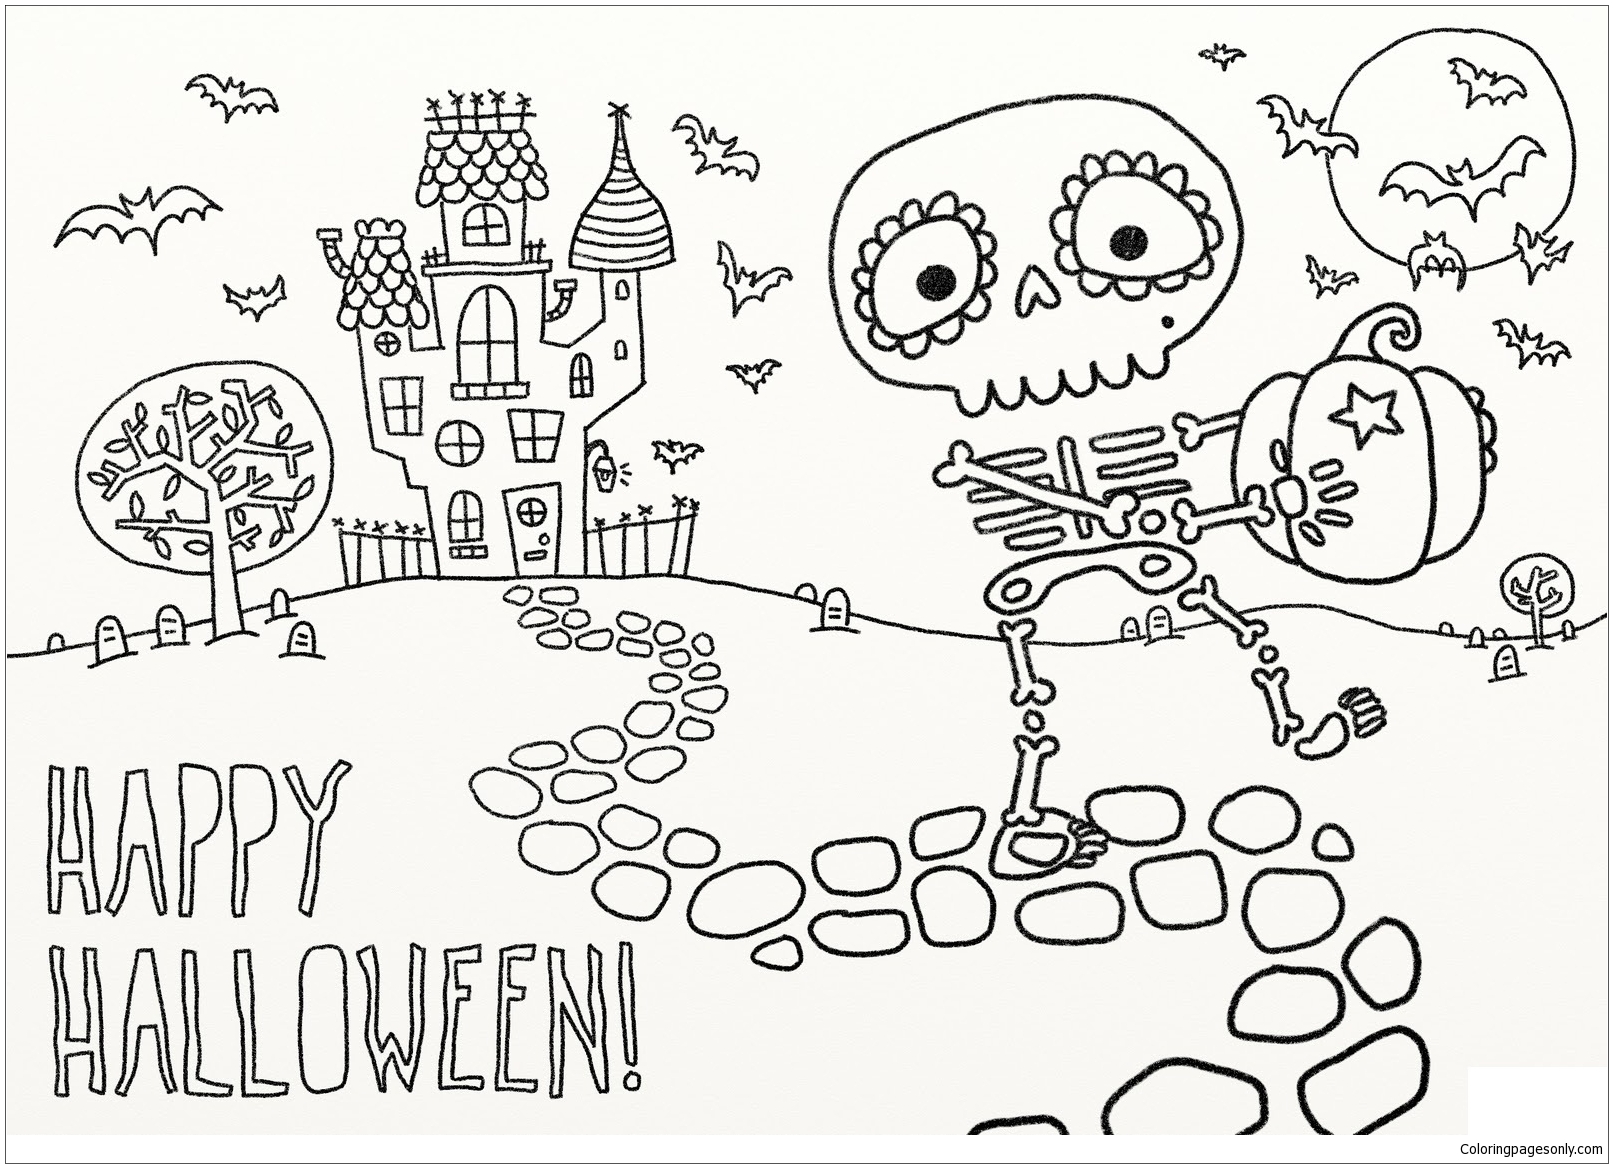 Happy Hallơween 1 Coloring Pages